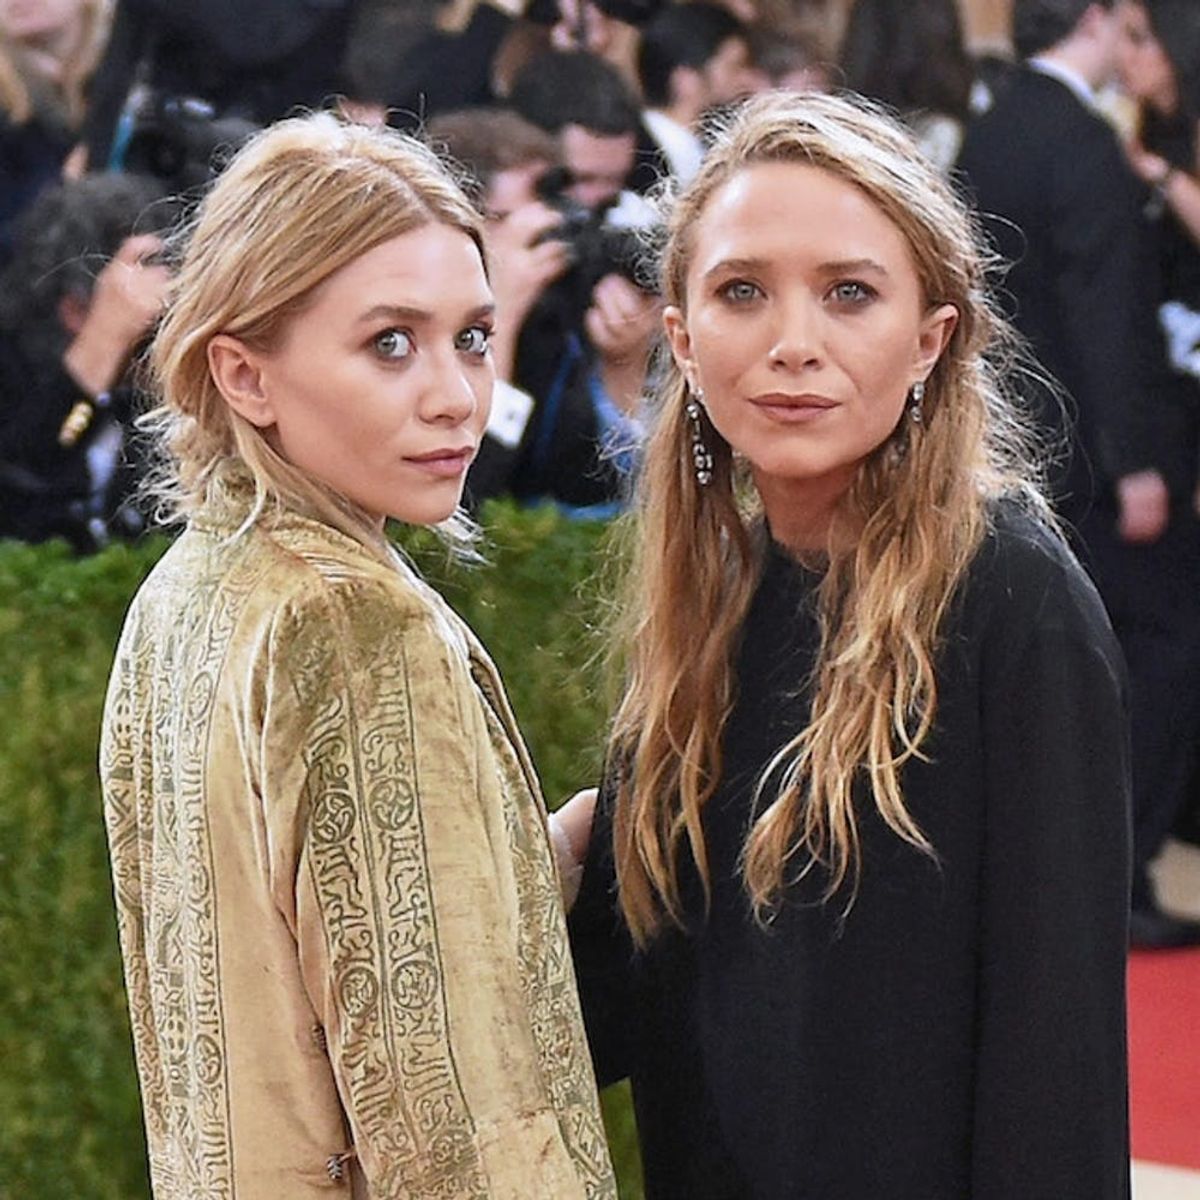 This Badass Illustration Celebrates Mary-Kate and Ashley Olsen’s 30th Birthday in Style